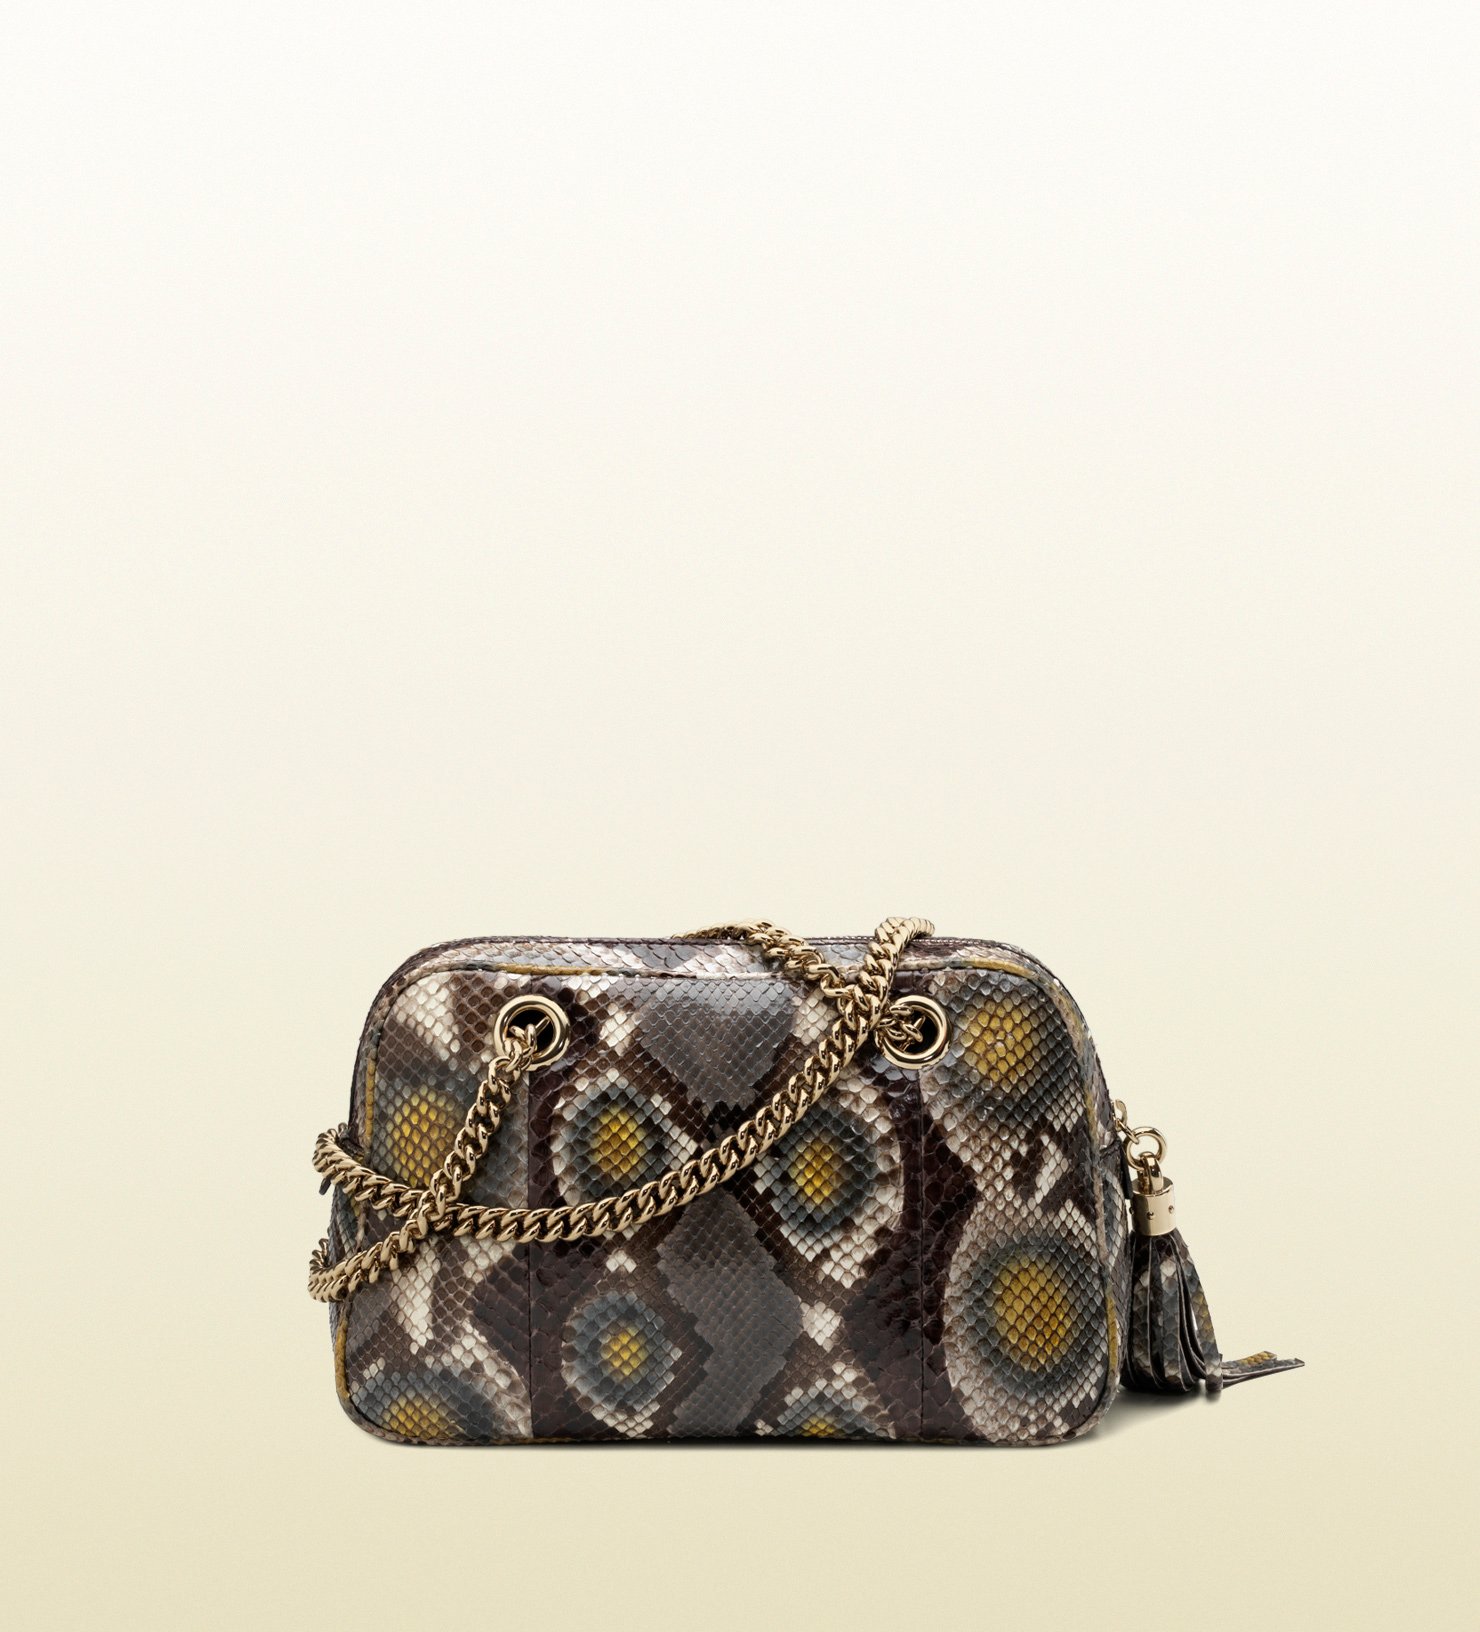 Gucci Soho Python Shoulder Bag with Double Chain Straps in Yellow - Lyst